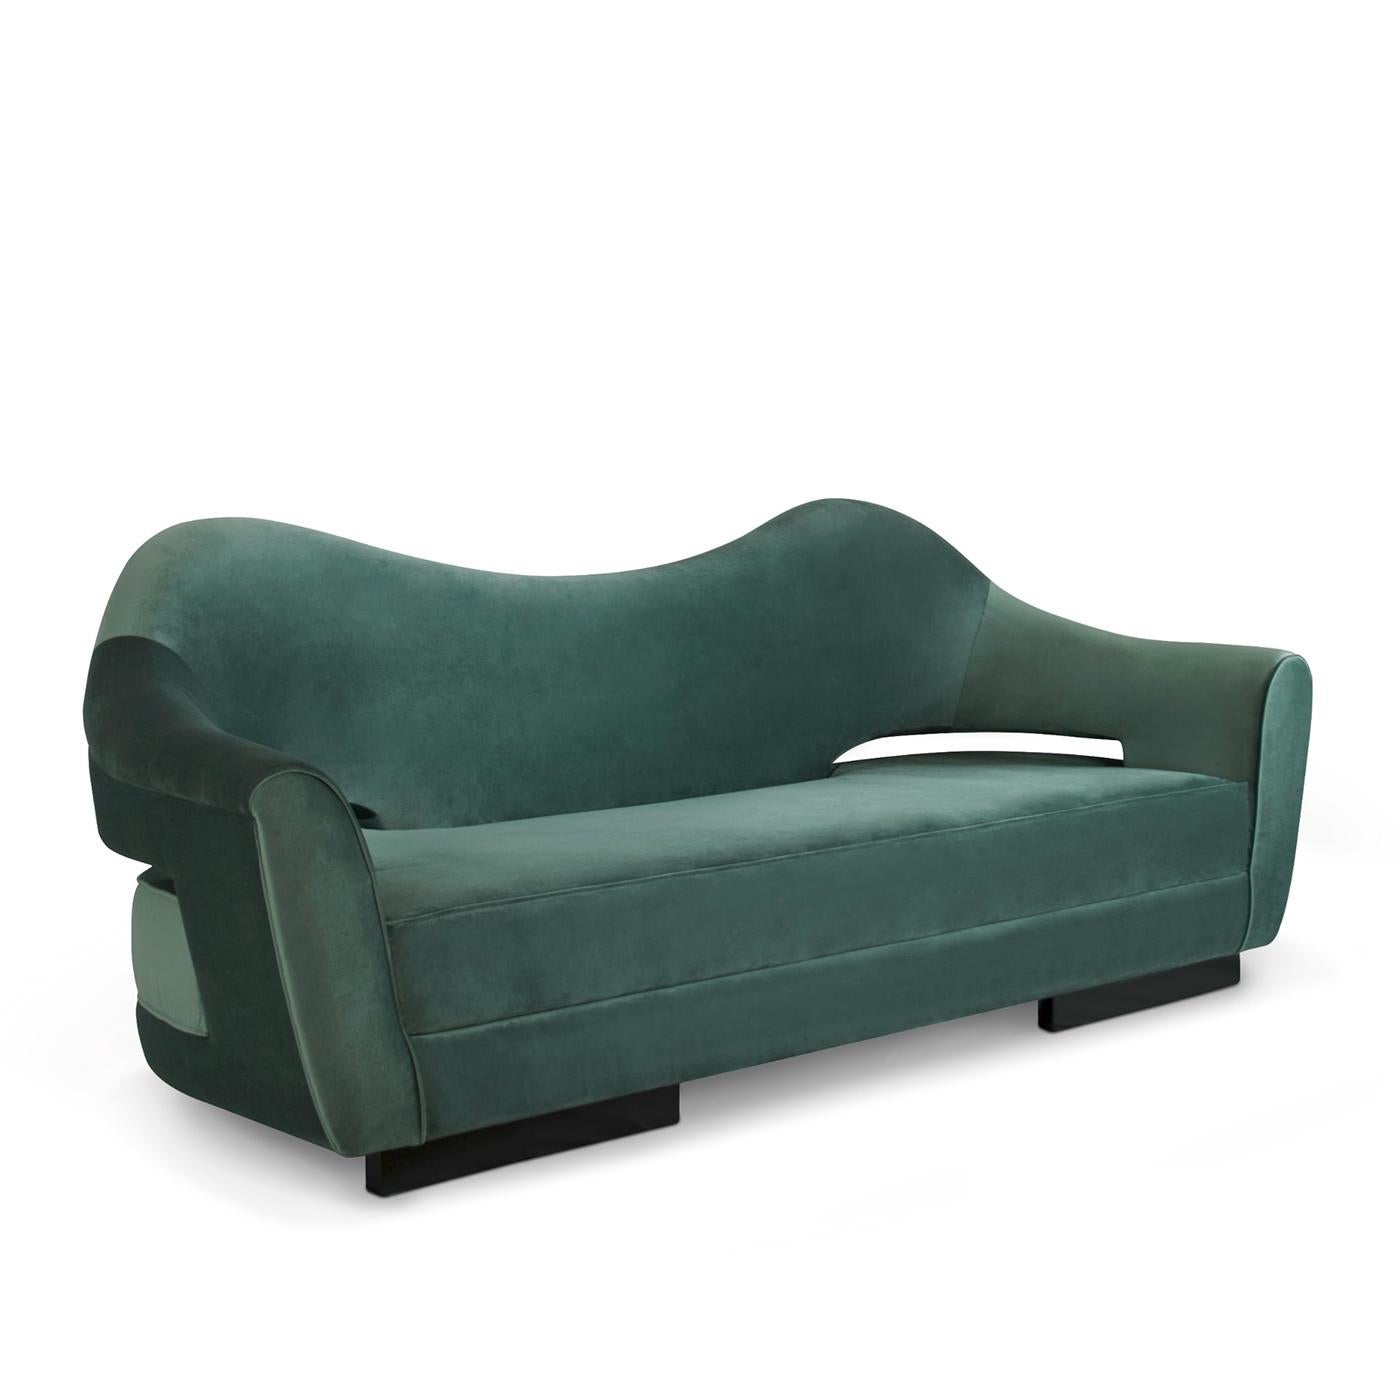 Sofa Tanner with solid wood structure, upholstered and
covered with soft green velvet fabric. Sofa's feet in solid
ash in matte wenge stained finish.